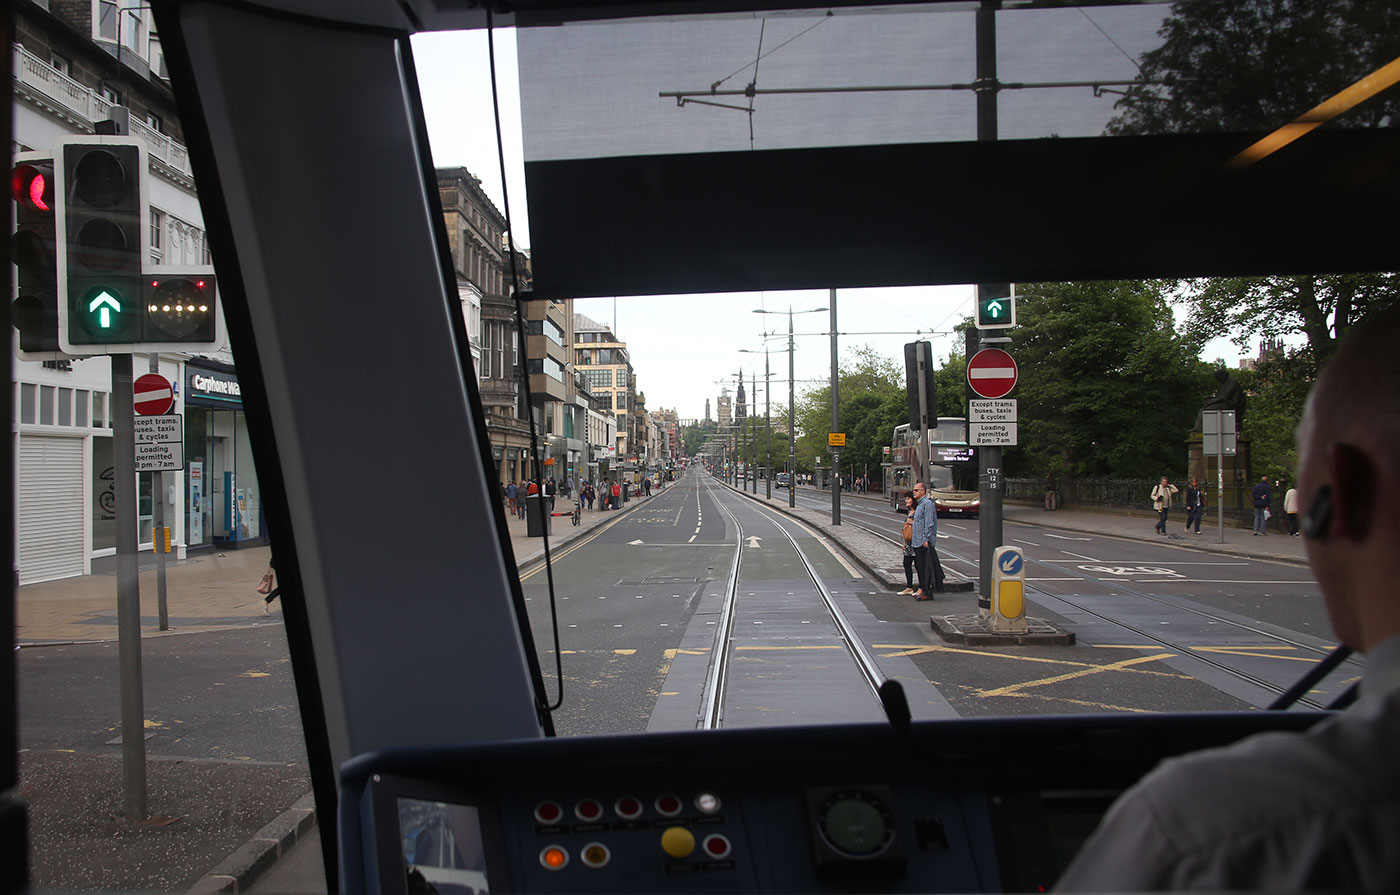 Edinburgh Tram Service  -  A tram continues to wait at the lights before entering Princes Street on its journey to York PlacePrinces Street  -  June 2014